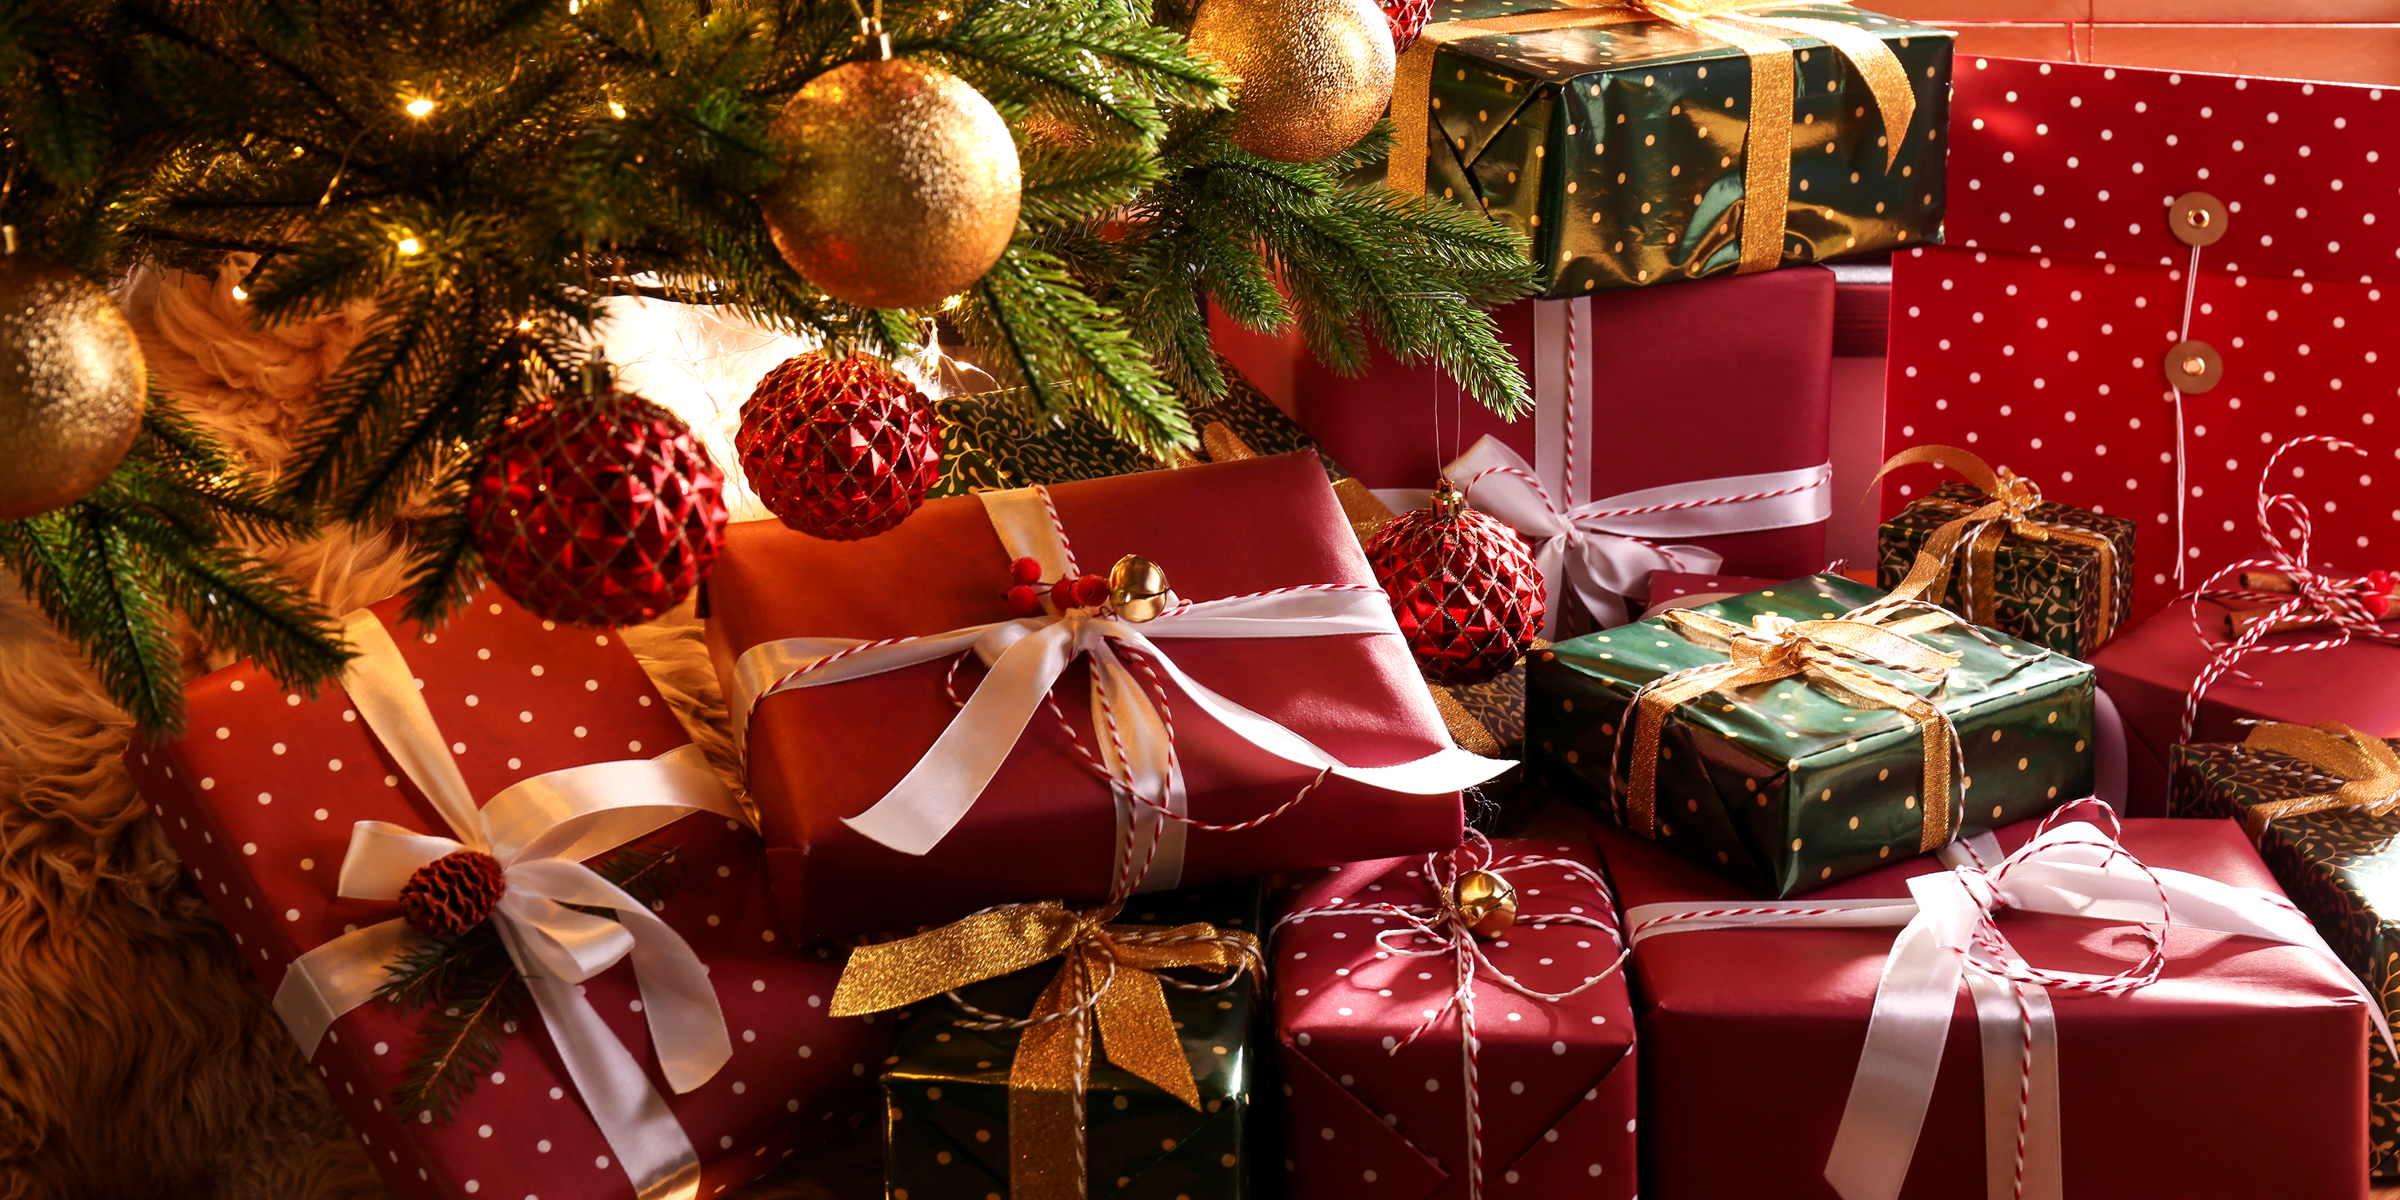 Christmas gifts under a tree | Source: Shutterstock